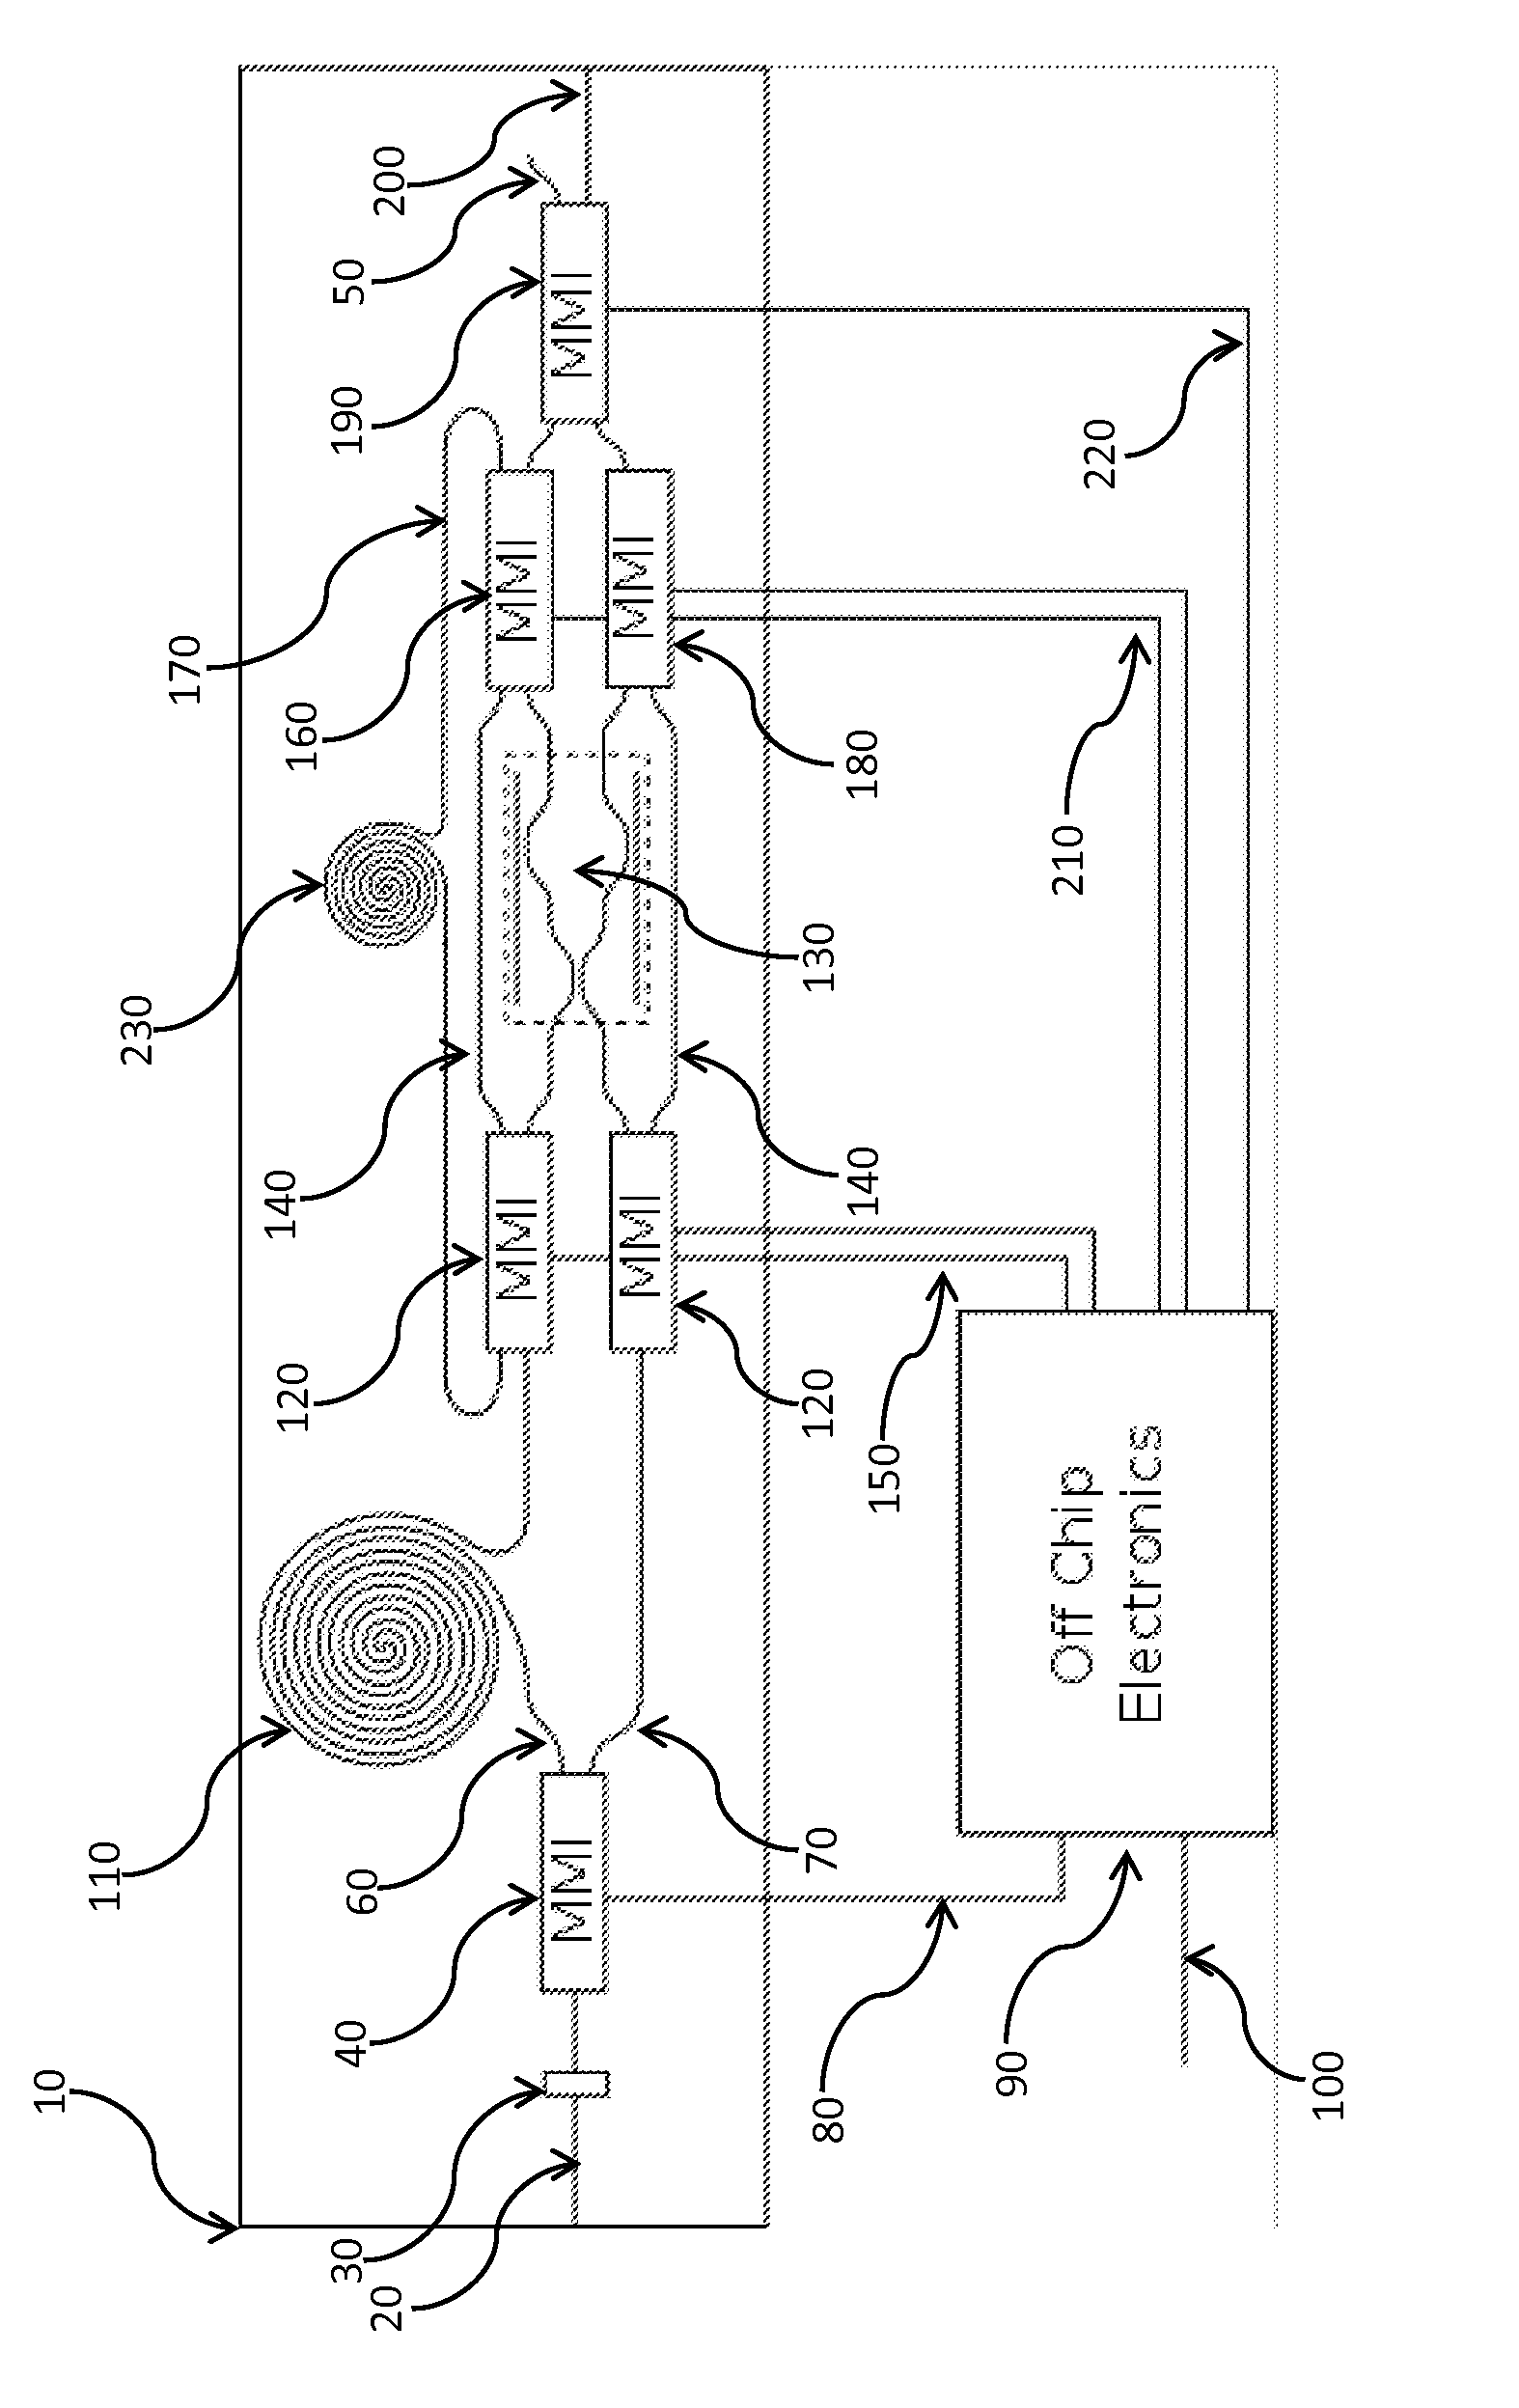 Sequential entangler of periodic photons in a single input and output mode